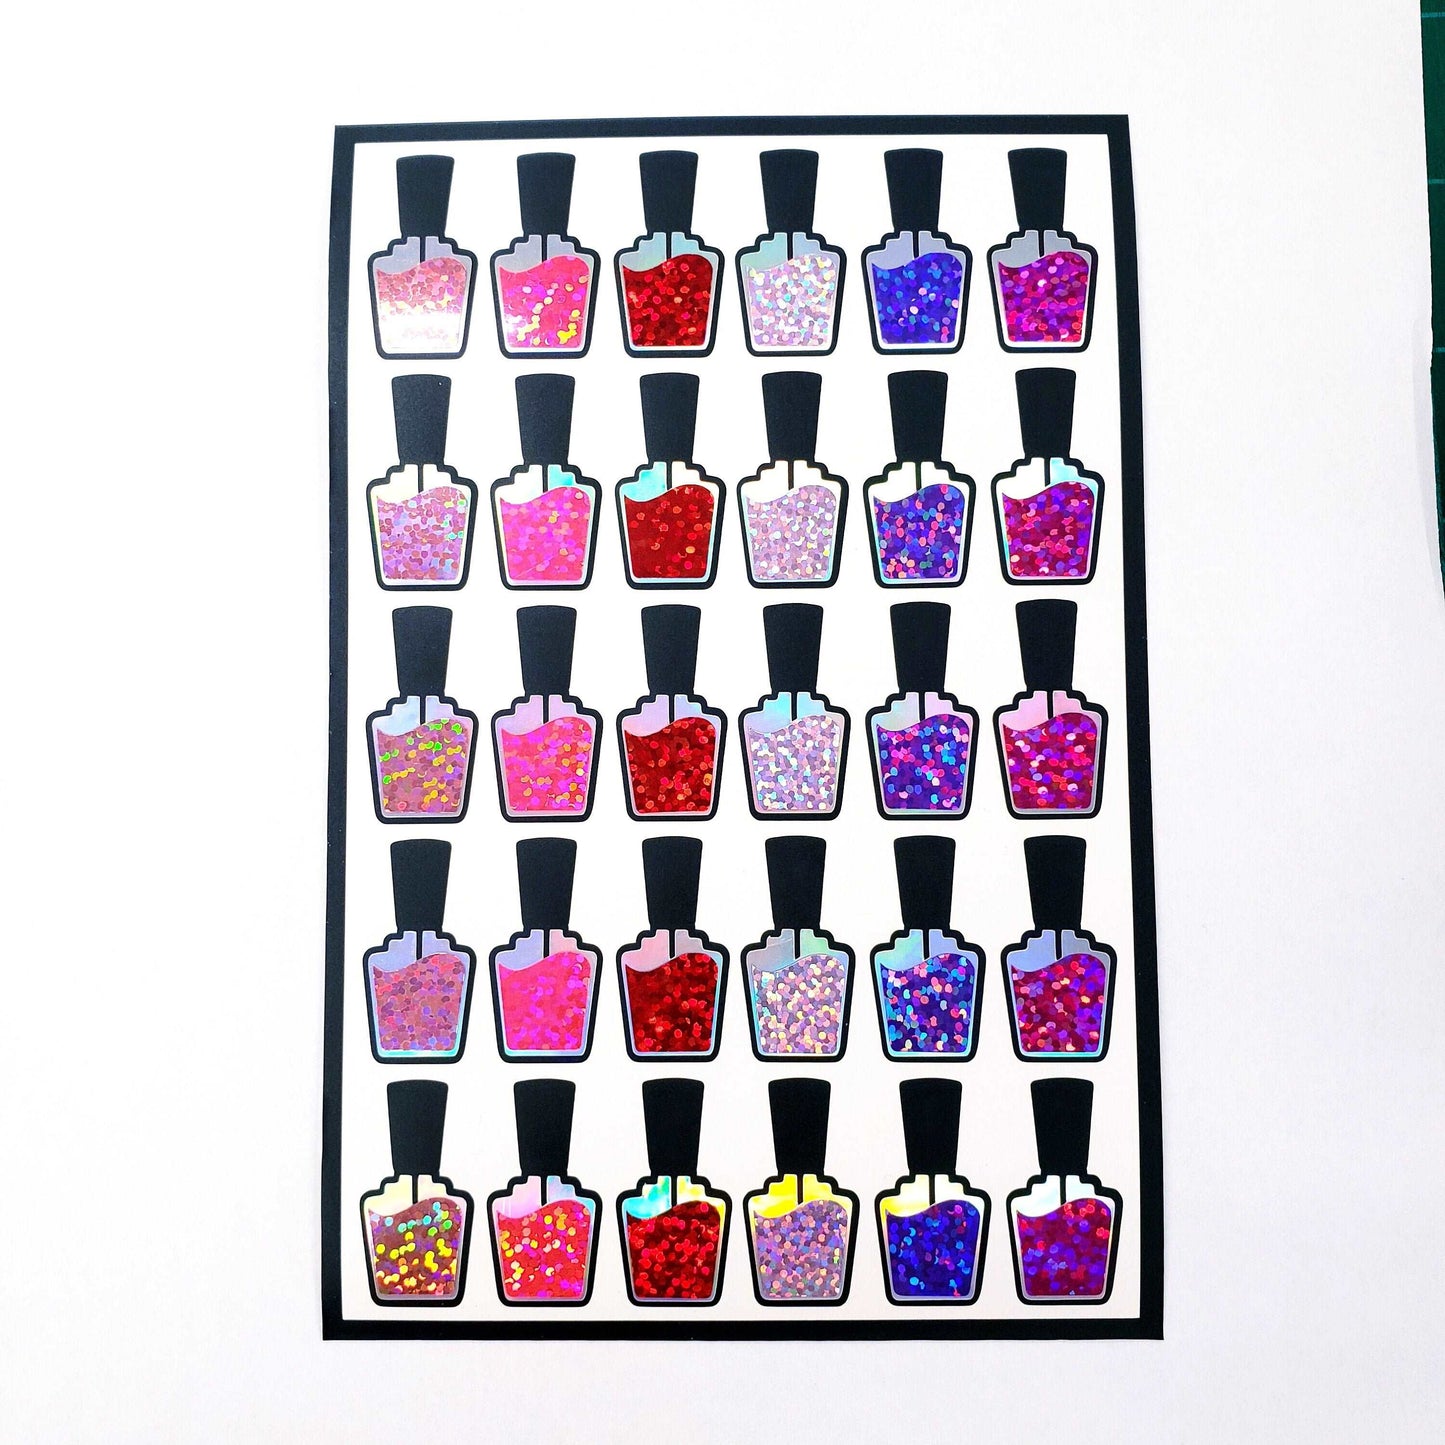 Nail Polish Bottles Sticker Sheet, set of 30 red, pink and purple glitter stickers for nail manicure appointments and cosmetic organization